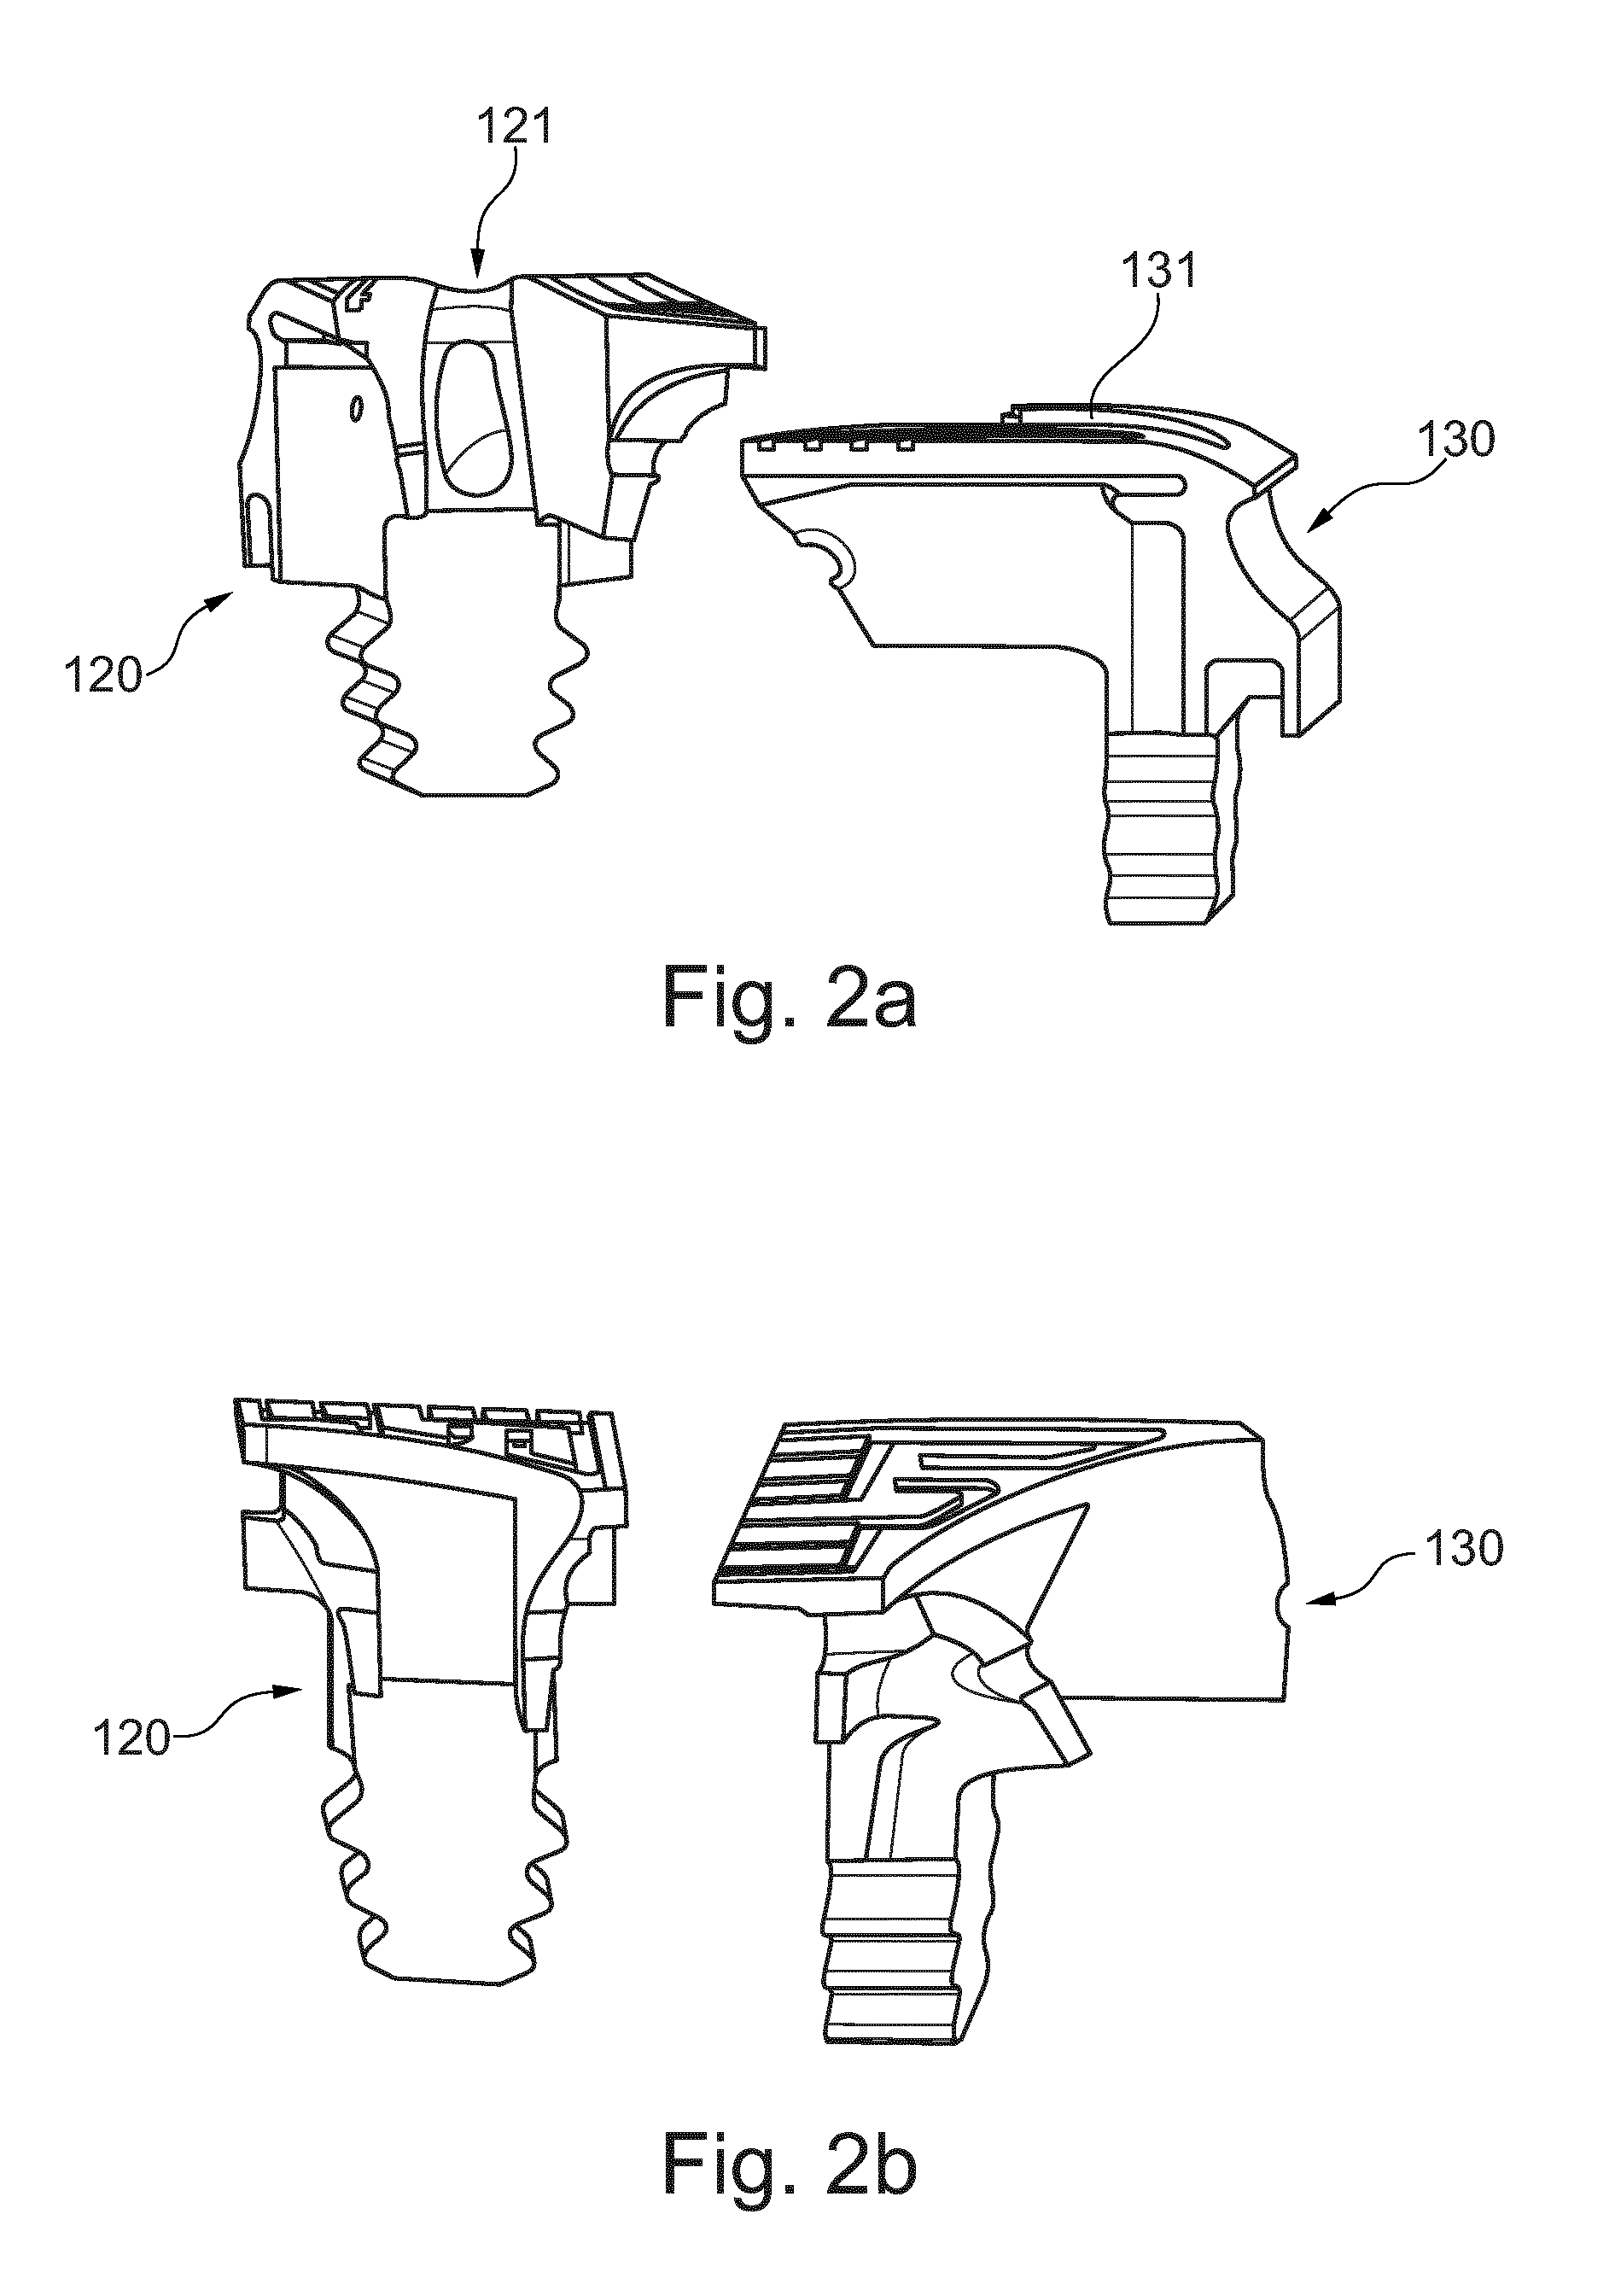 Blade assembly for a turbomachine on the basis of a modular structure